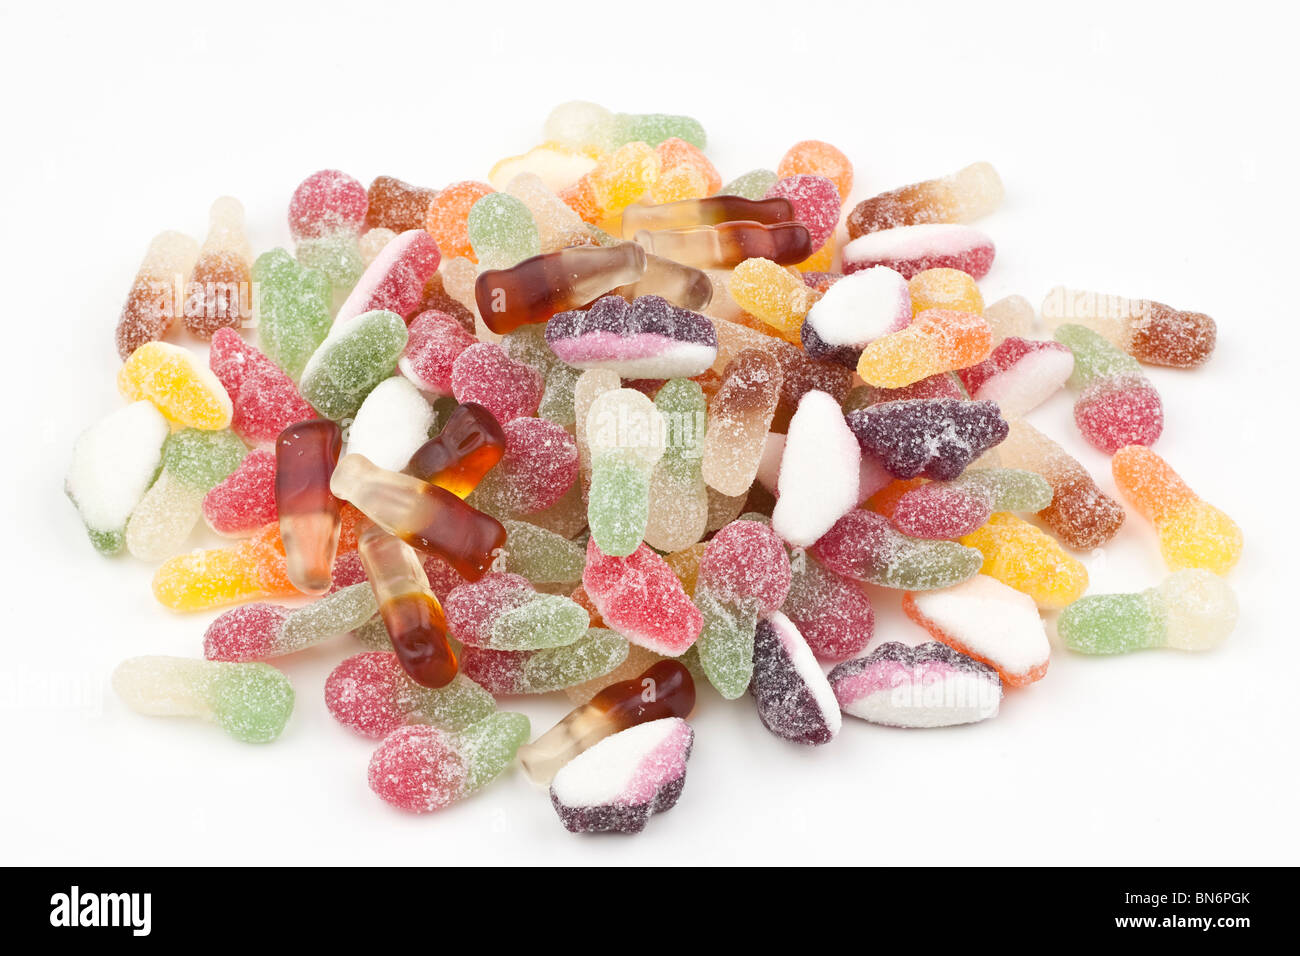 Pile of sugared chewy gum sweets Stock Photo